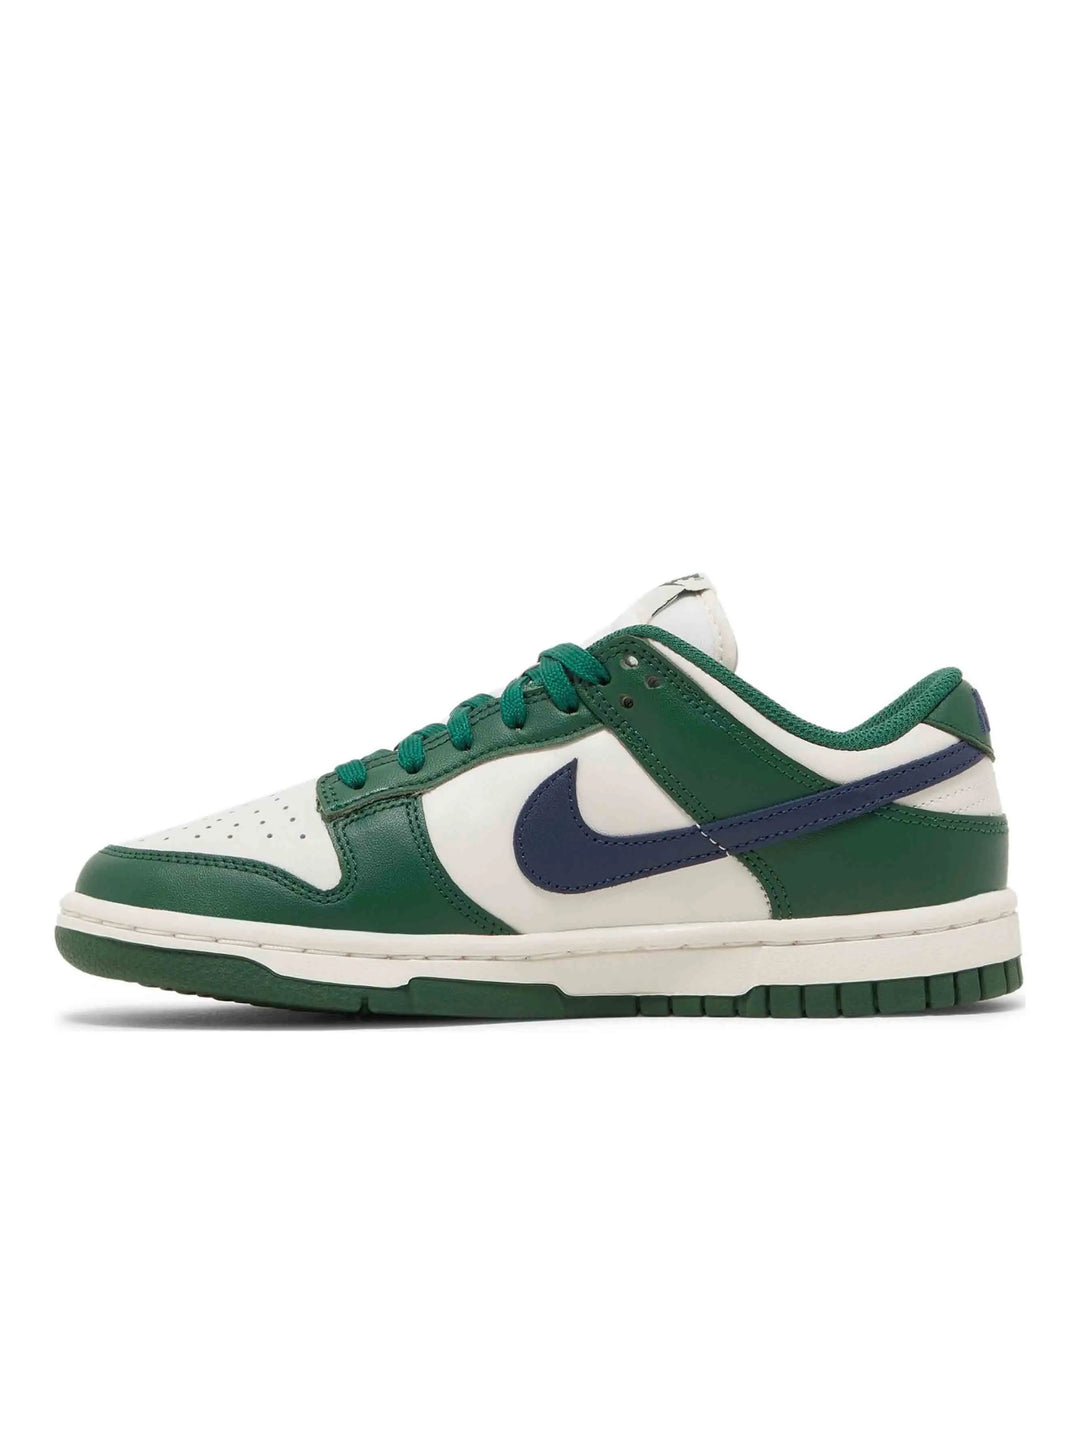 Nike Dunk Low Gorge Green (W) Prior